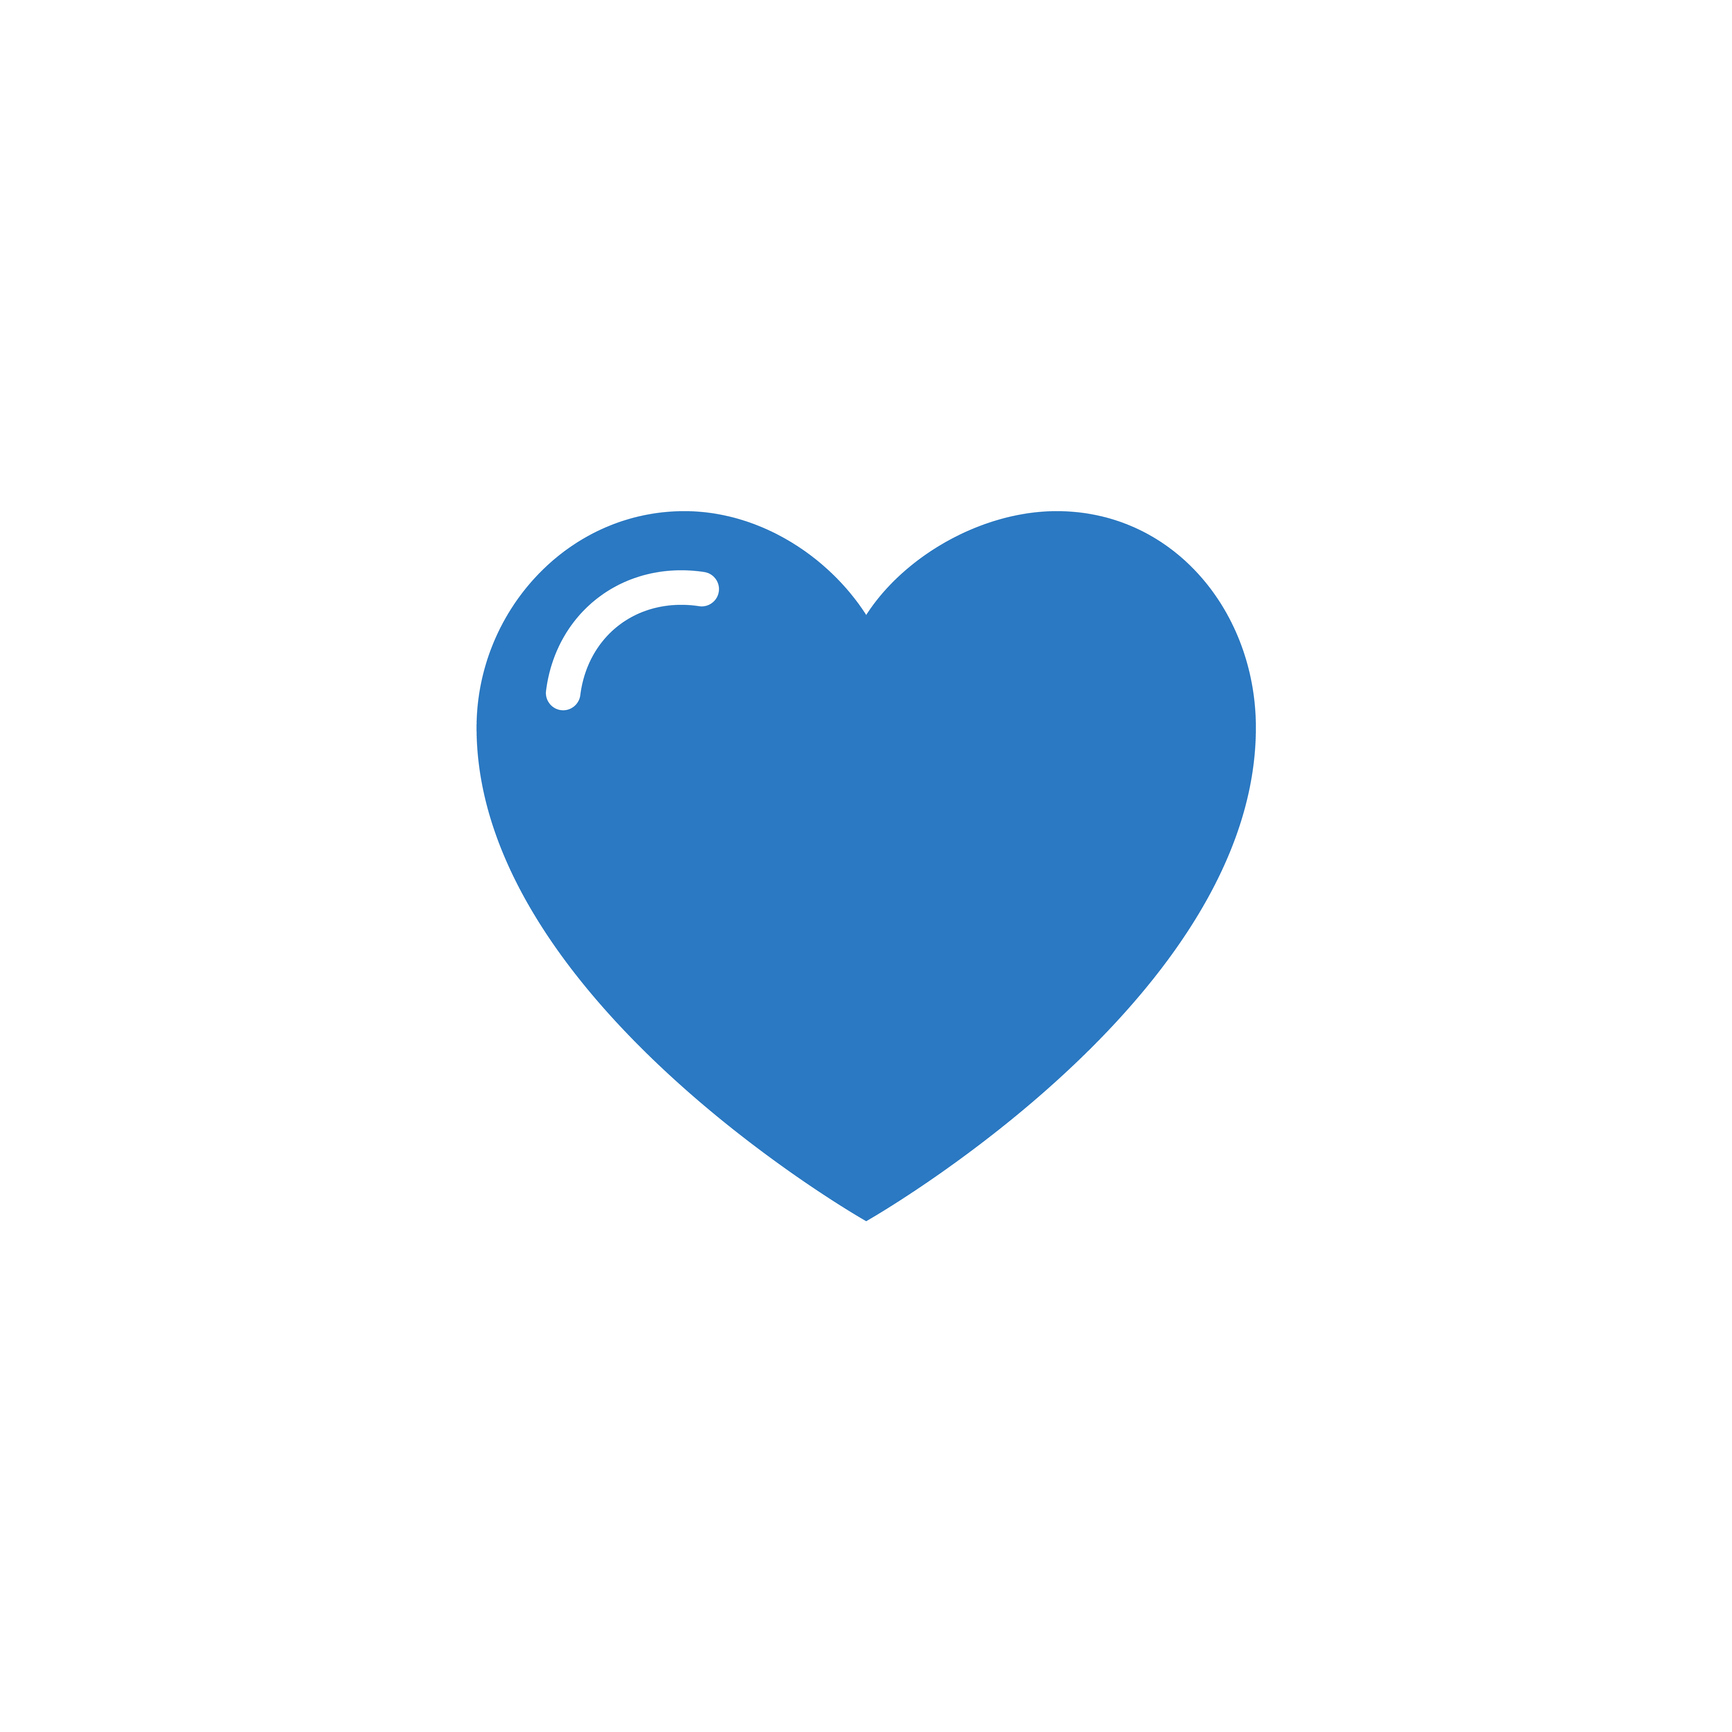 illustration of a heart icon in blue